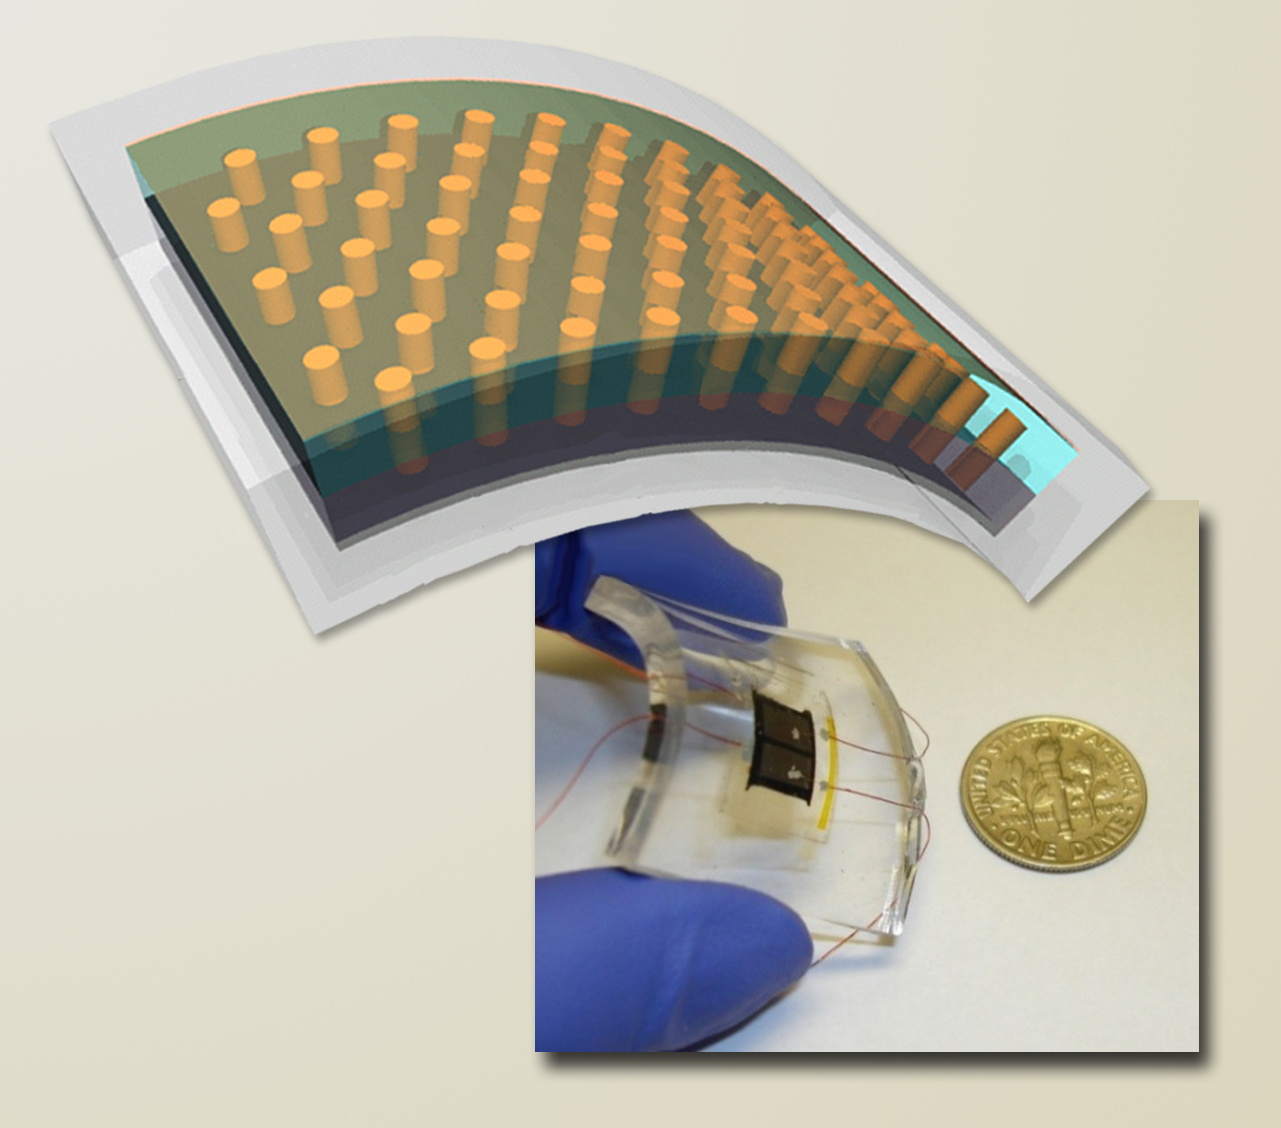 A flexible solar cell is achieved by removing the aluminum substrate, substituting an indium bottom electrode, and embedding the 3-D array in clear plastic. 